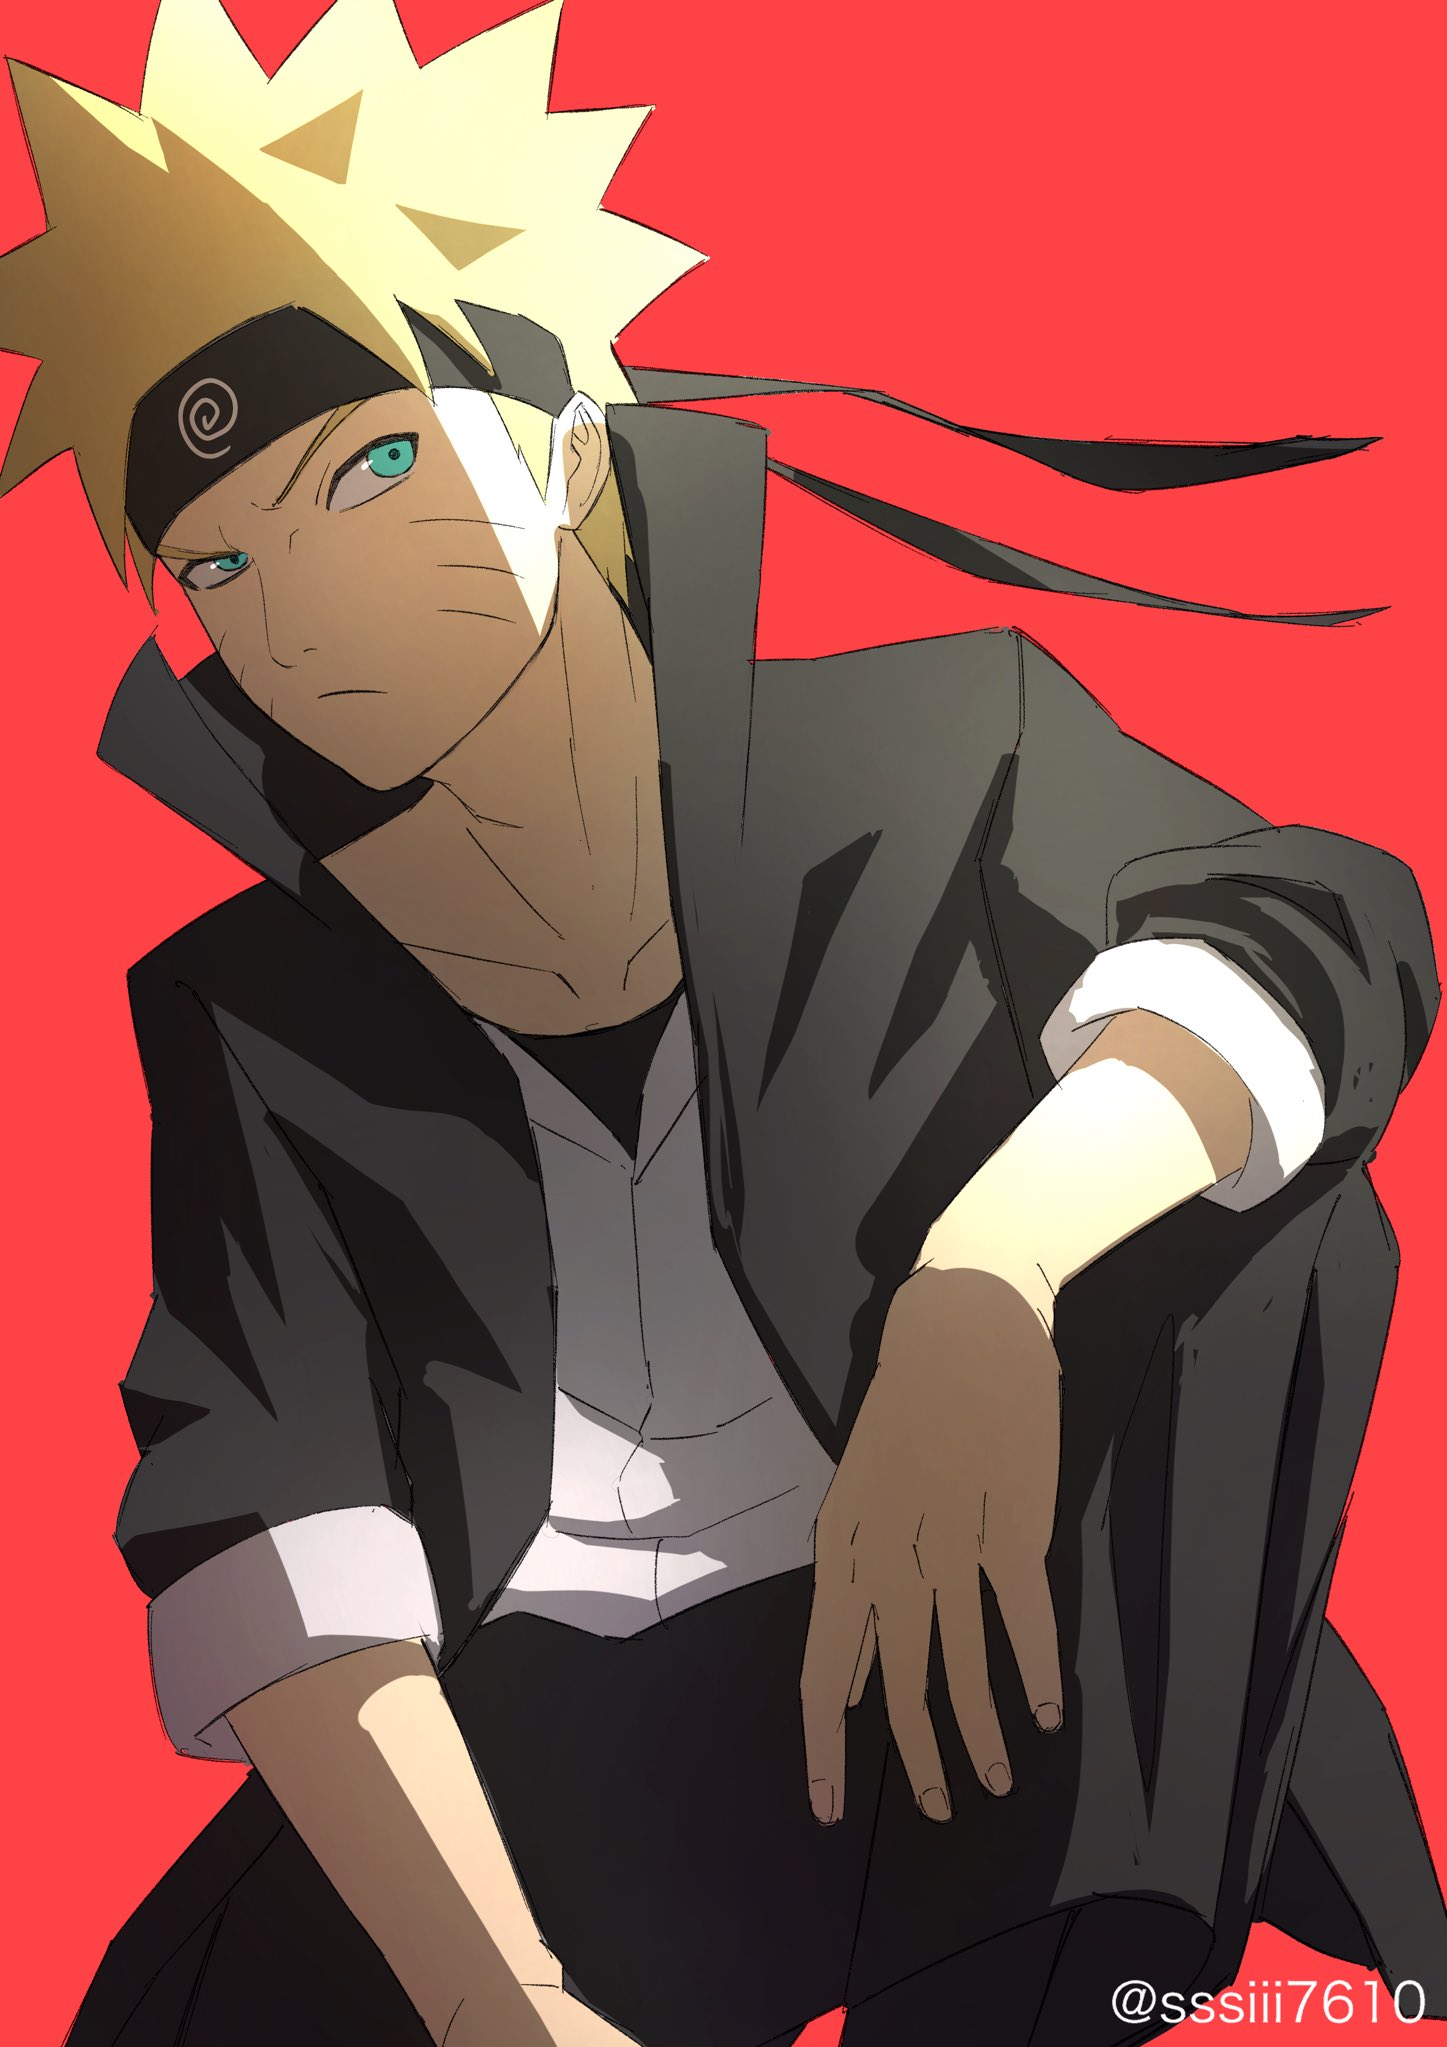 1boy bandana black_suit blonde_hair blue_eyes closed_mouth commentary facial_mark highres looking_at_viewer male_focus naruto naruto_(series) red_background short_sleeves simple_background spiky_hair sssiii7610 uzumaki_naruto